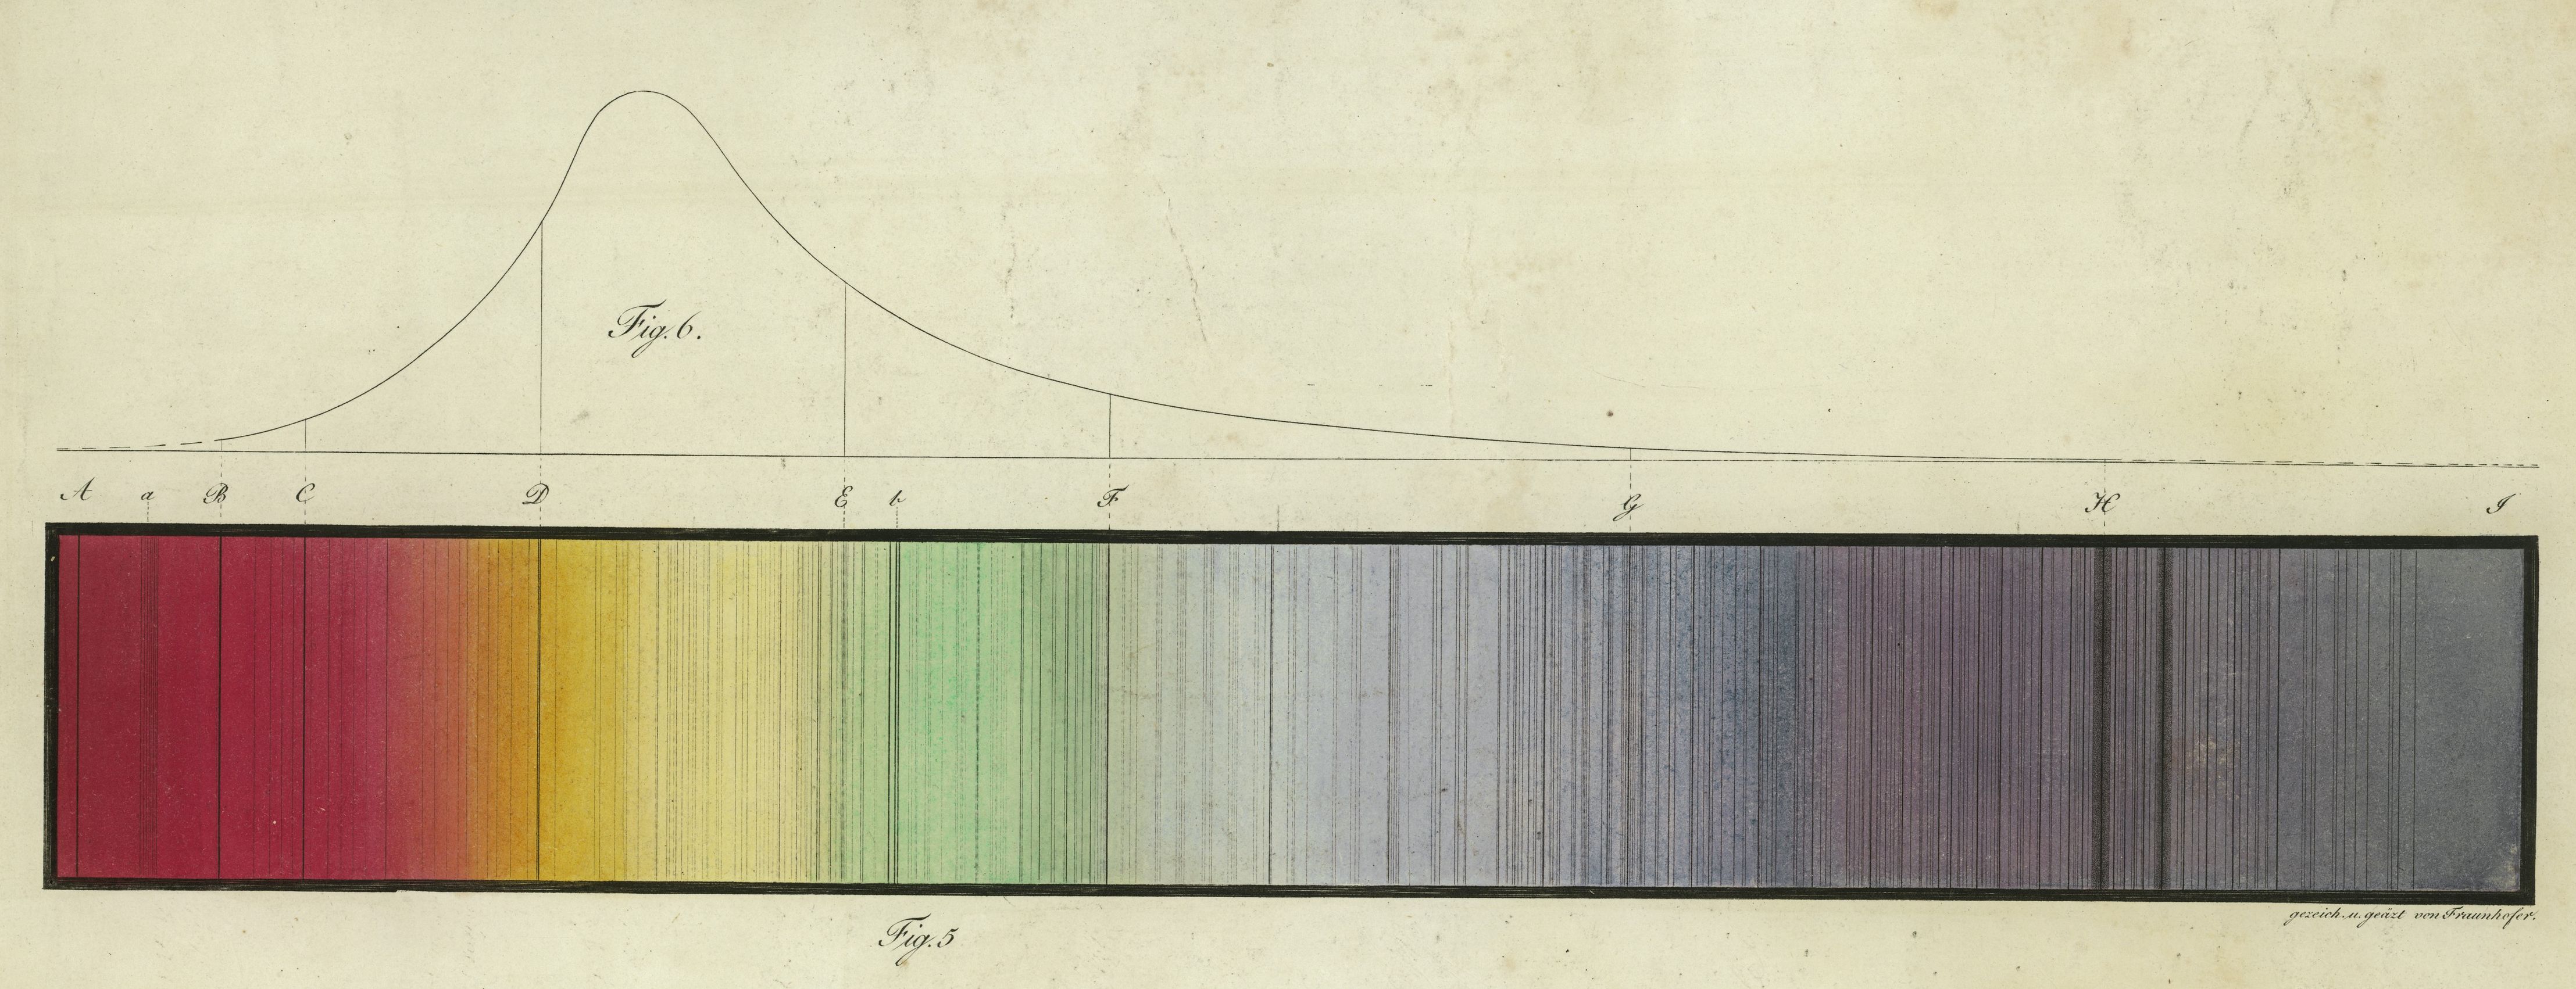 This copper-etching was made by Fraunhofer himself. It shows the full visible spectrum including the famous Fraunhofer lines[^4], some of them named with letters. Above it is the curve of spectral response of the eye to daylight illumination. [Wikimedia, CC-BY-SA](https://commons.wikimedia.org/wiki/File:Fraunhofer_Spektrum_Medium.jpg).